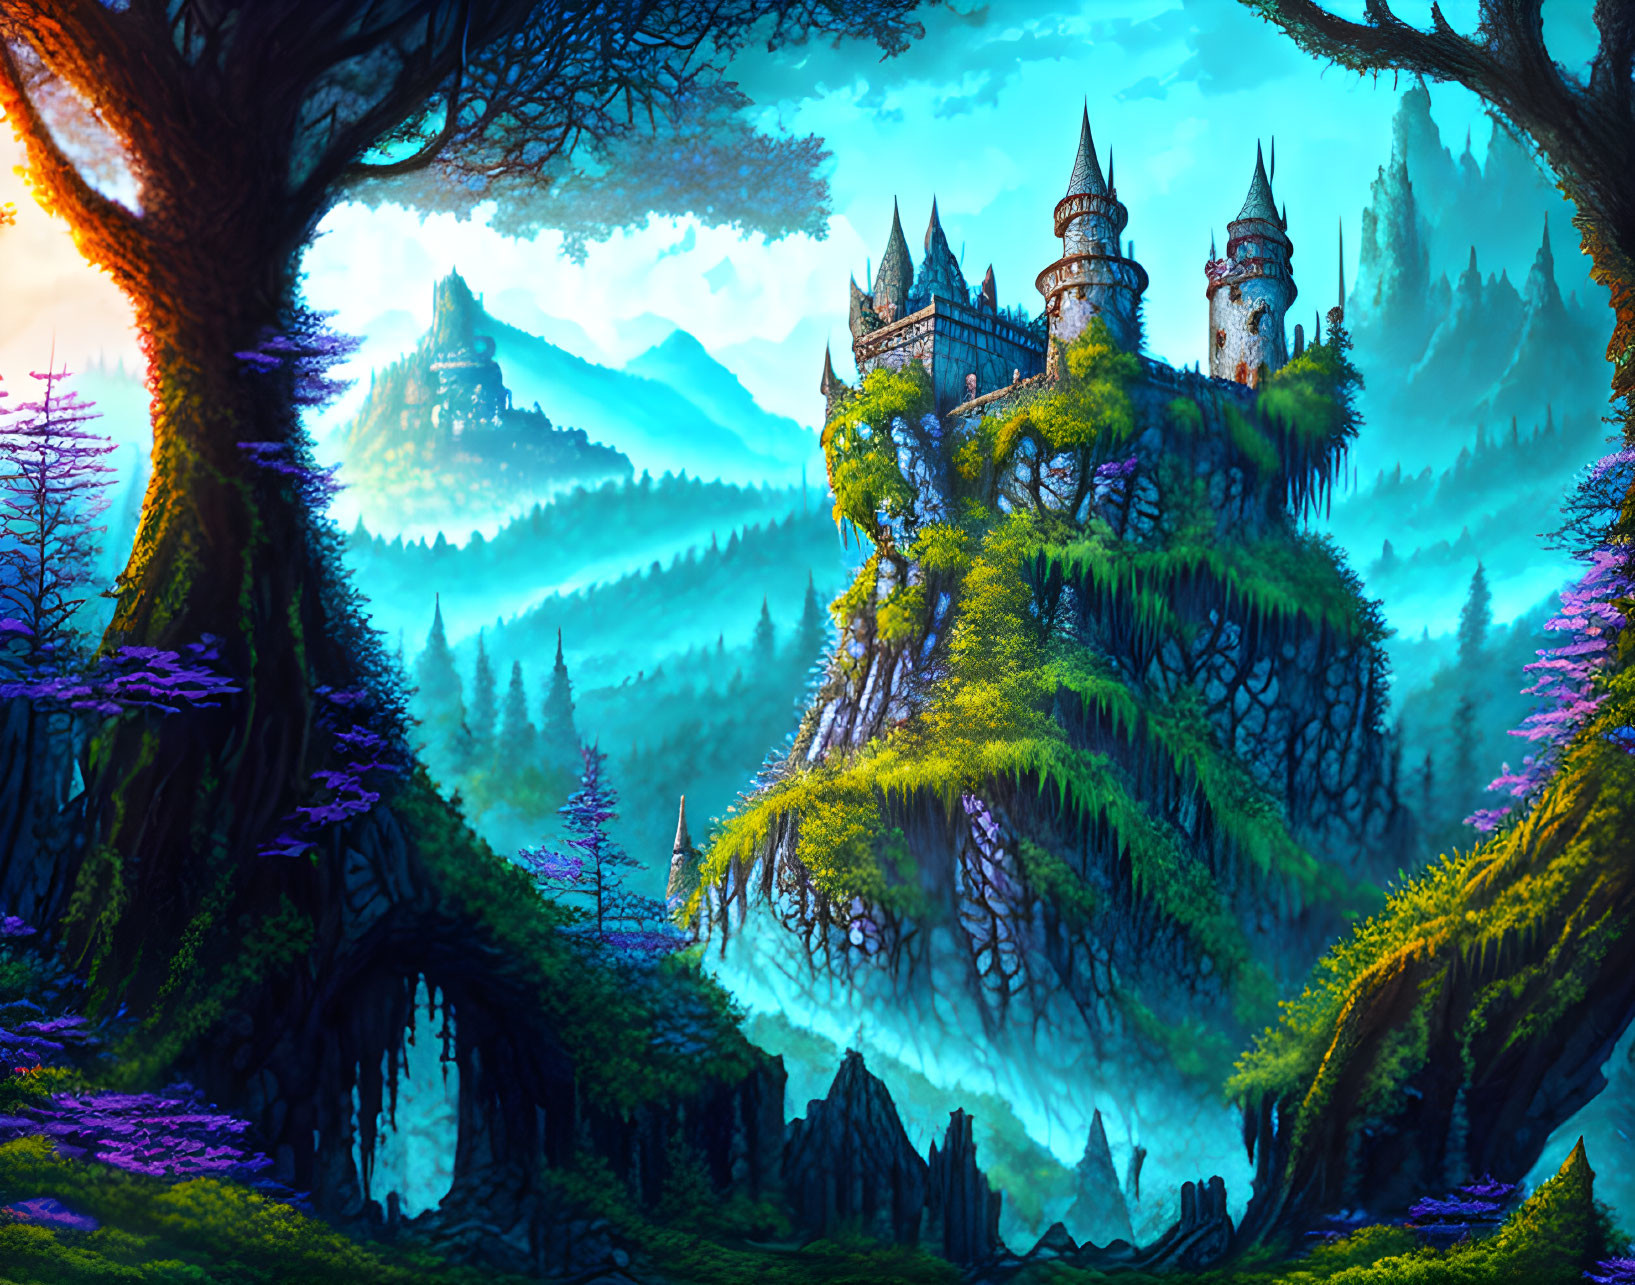 Mystical castle on green hill with forests, mountains, and blue sky